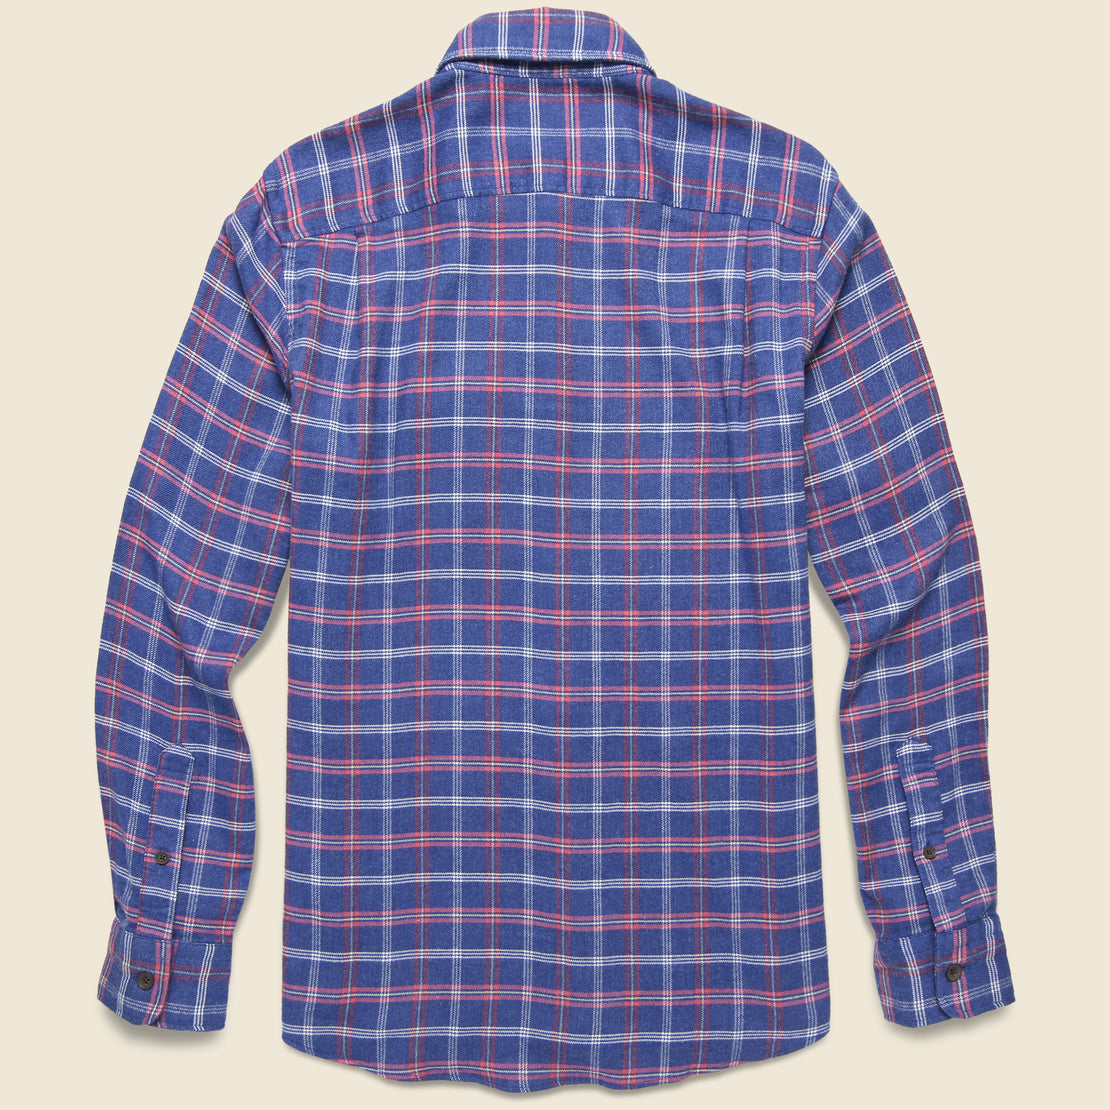 Movement Flannel - Table Mesa Plaid - Faherty - STAG Provisions - Tops - L/S Woven - Plaid